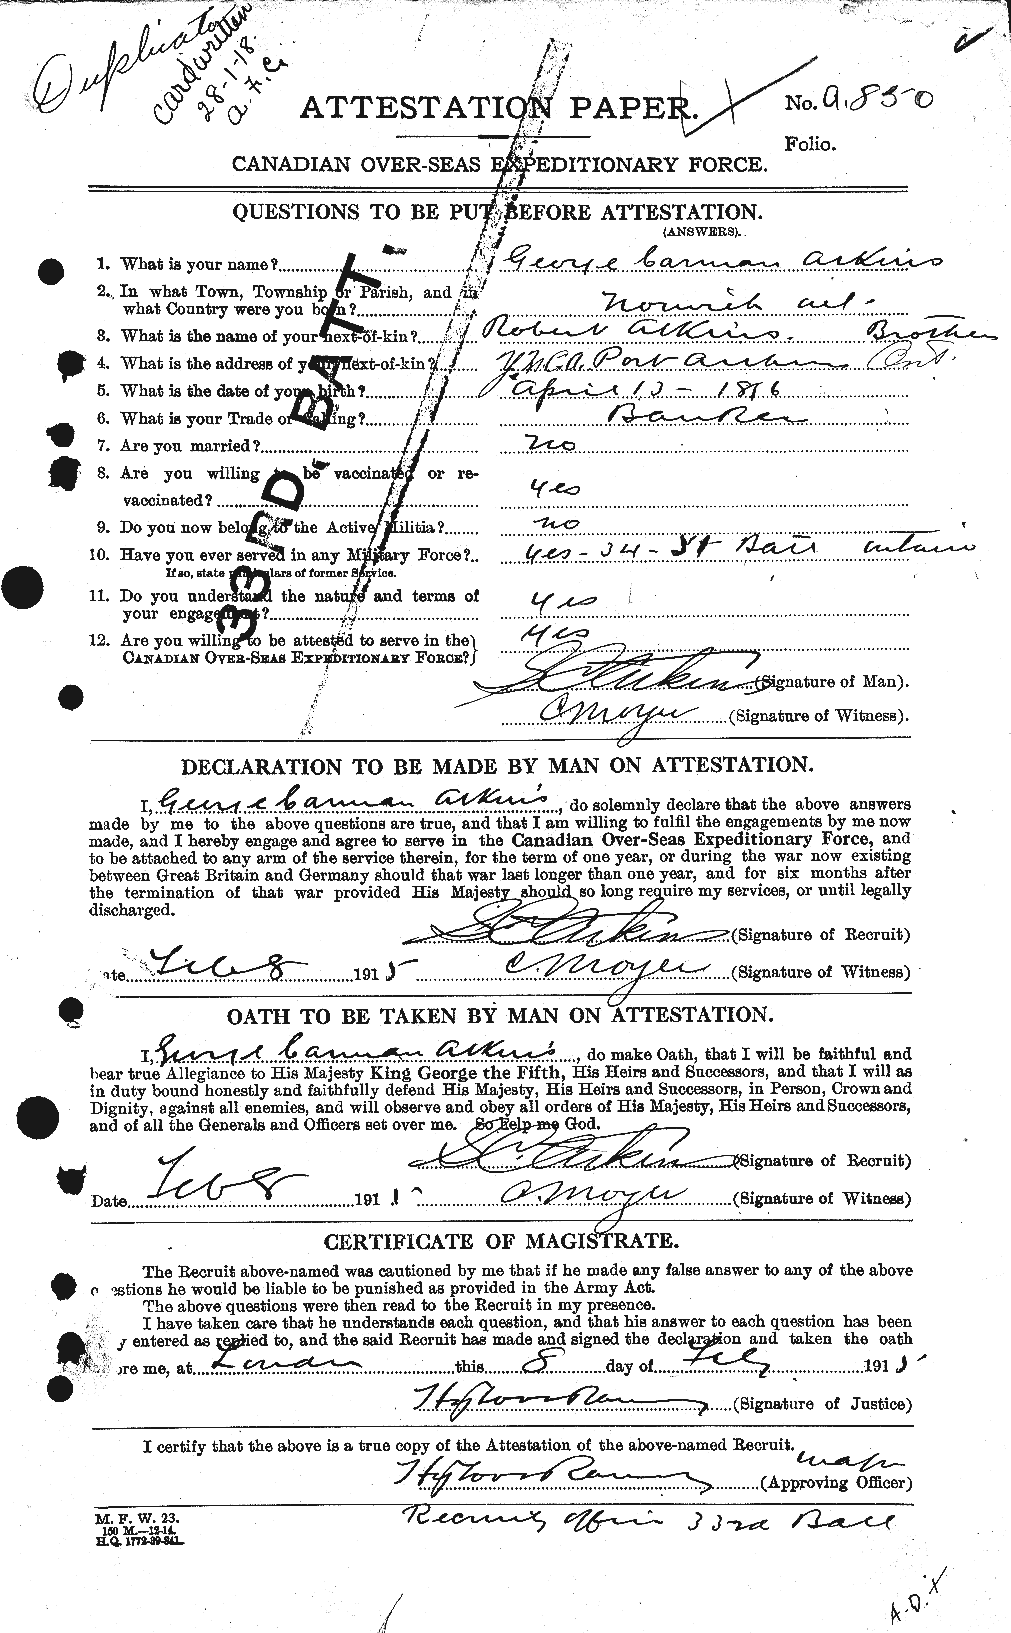 Personnel Records of the First World War - CEF 216854a